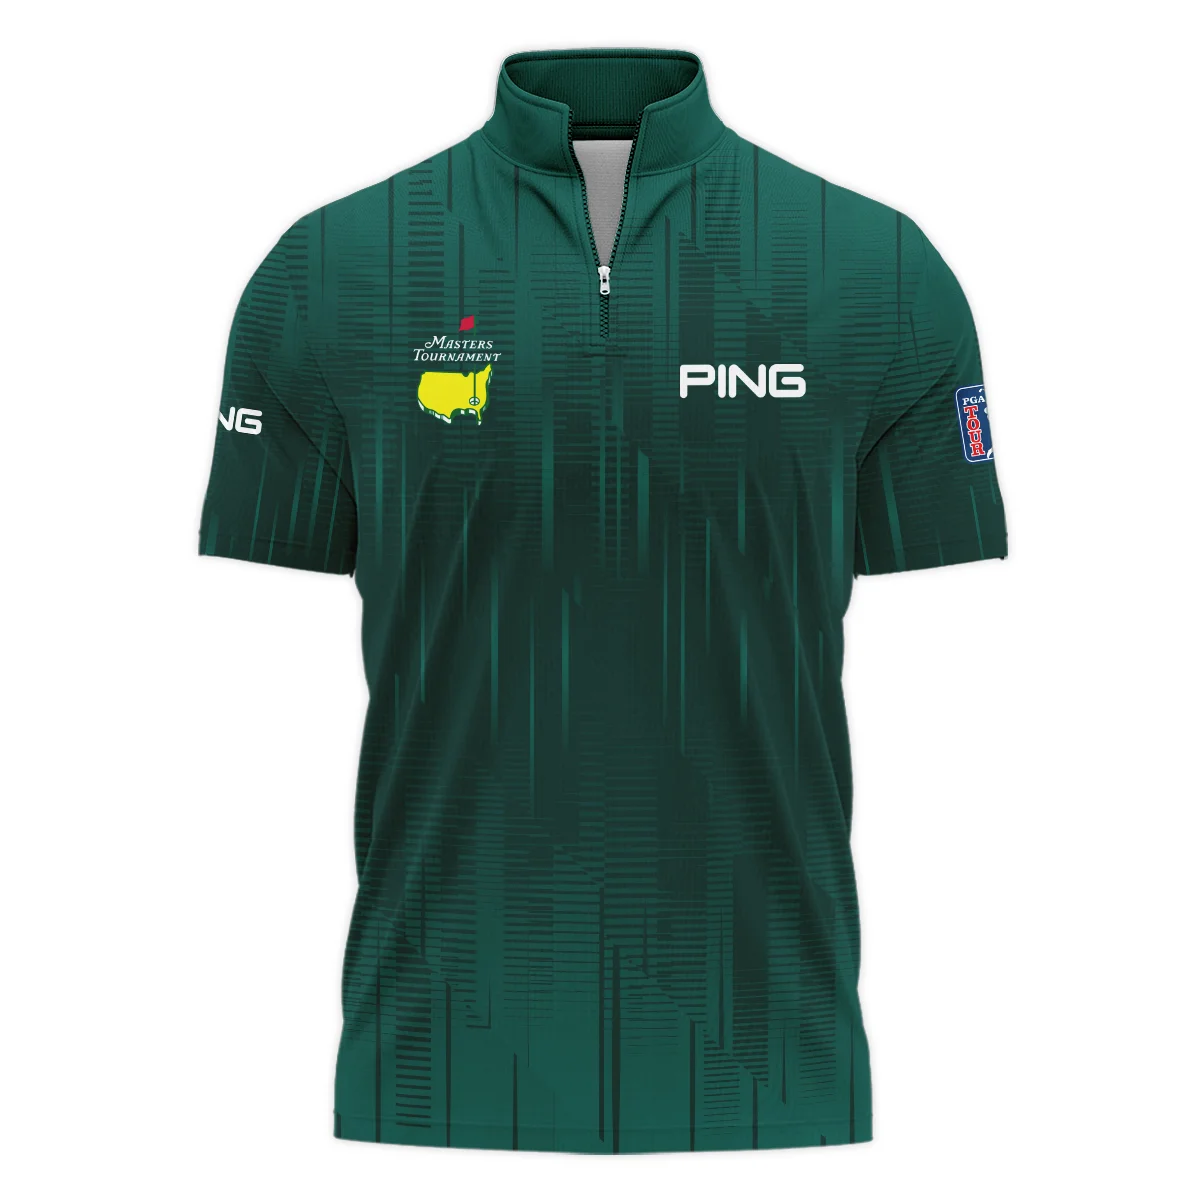 Masters Tournament Ping Dark Green Gradient Stripes Pattern Style Classic, Short Sleeve Polo Shirts Quarter-Zip Casual Slim Fit Mock Neck Basic